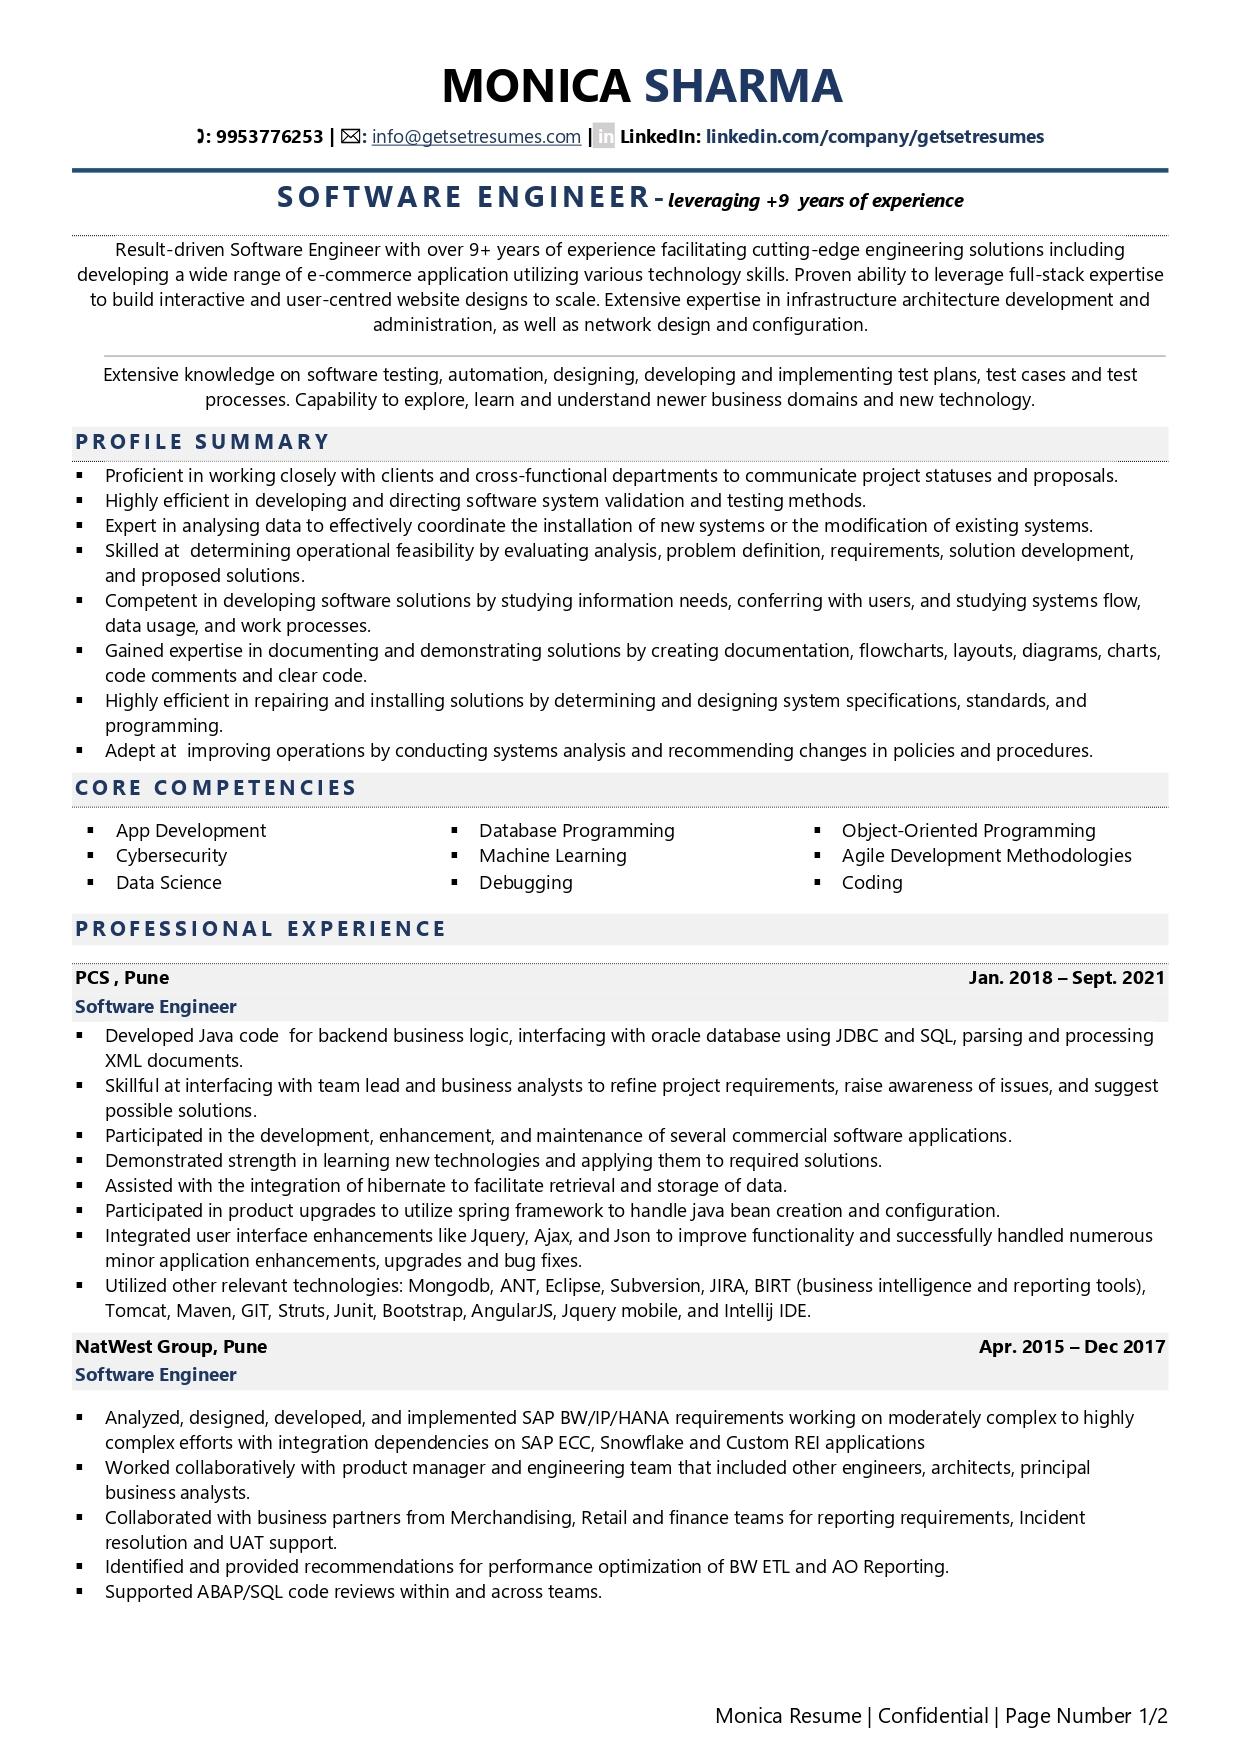 Software Engineer - Resume Example & Template